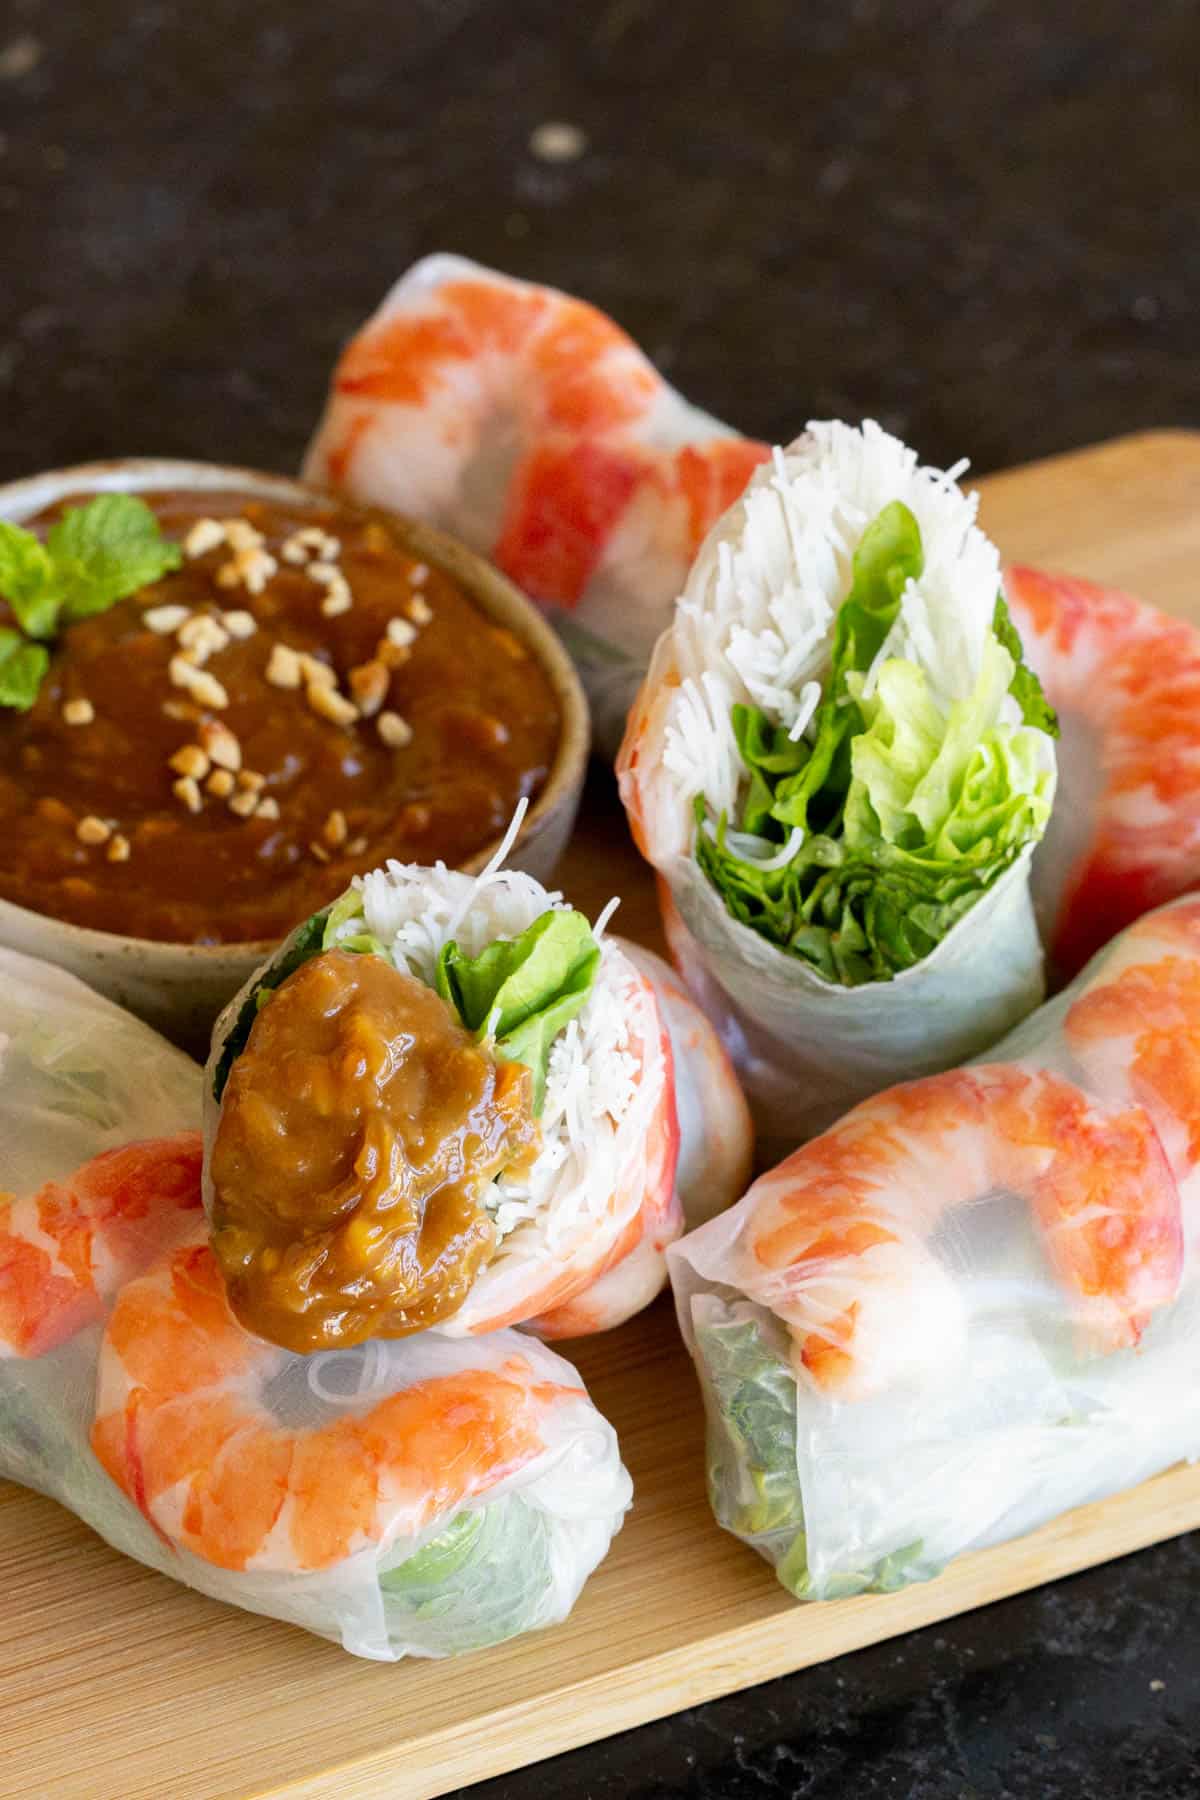 Fresh spring rolls dipped in peanut sauce with hoisin and garlic.